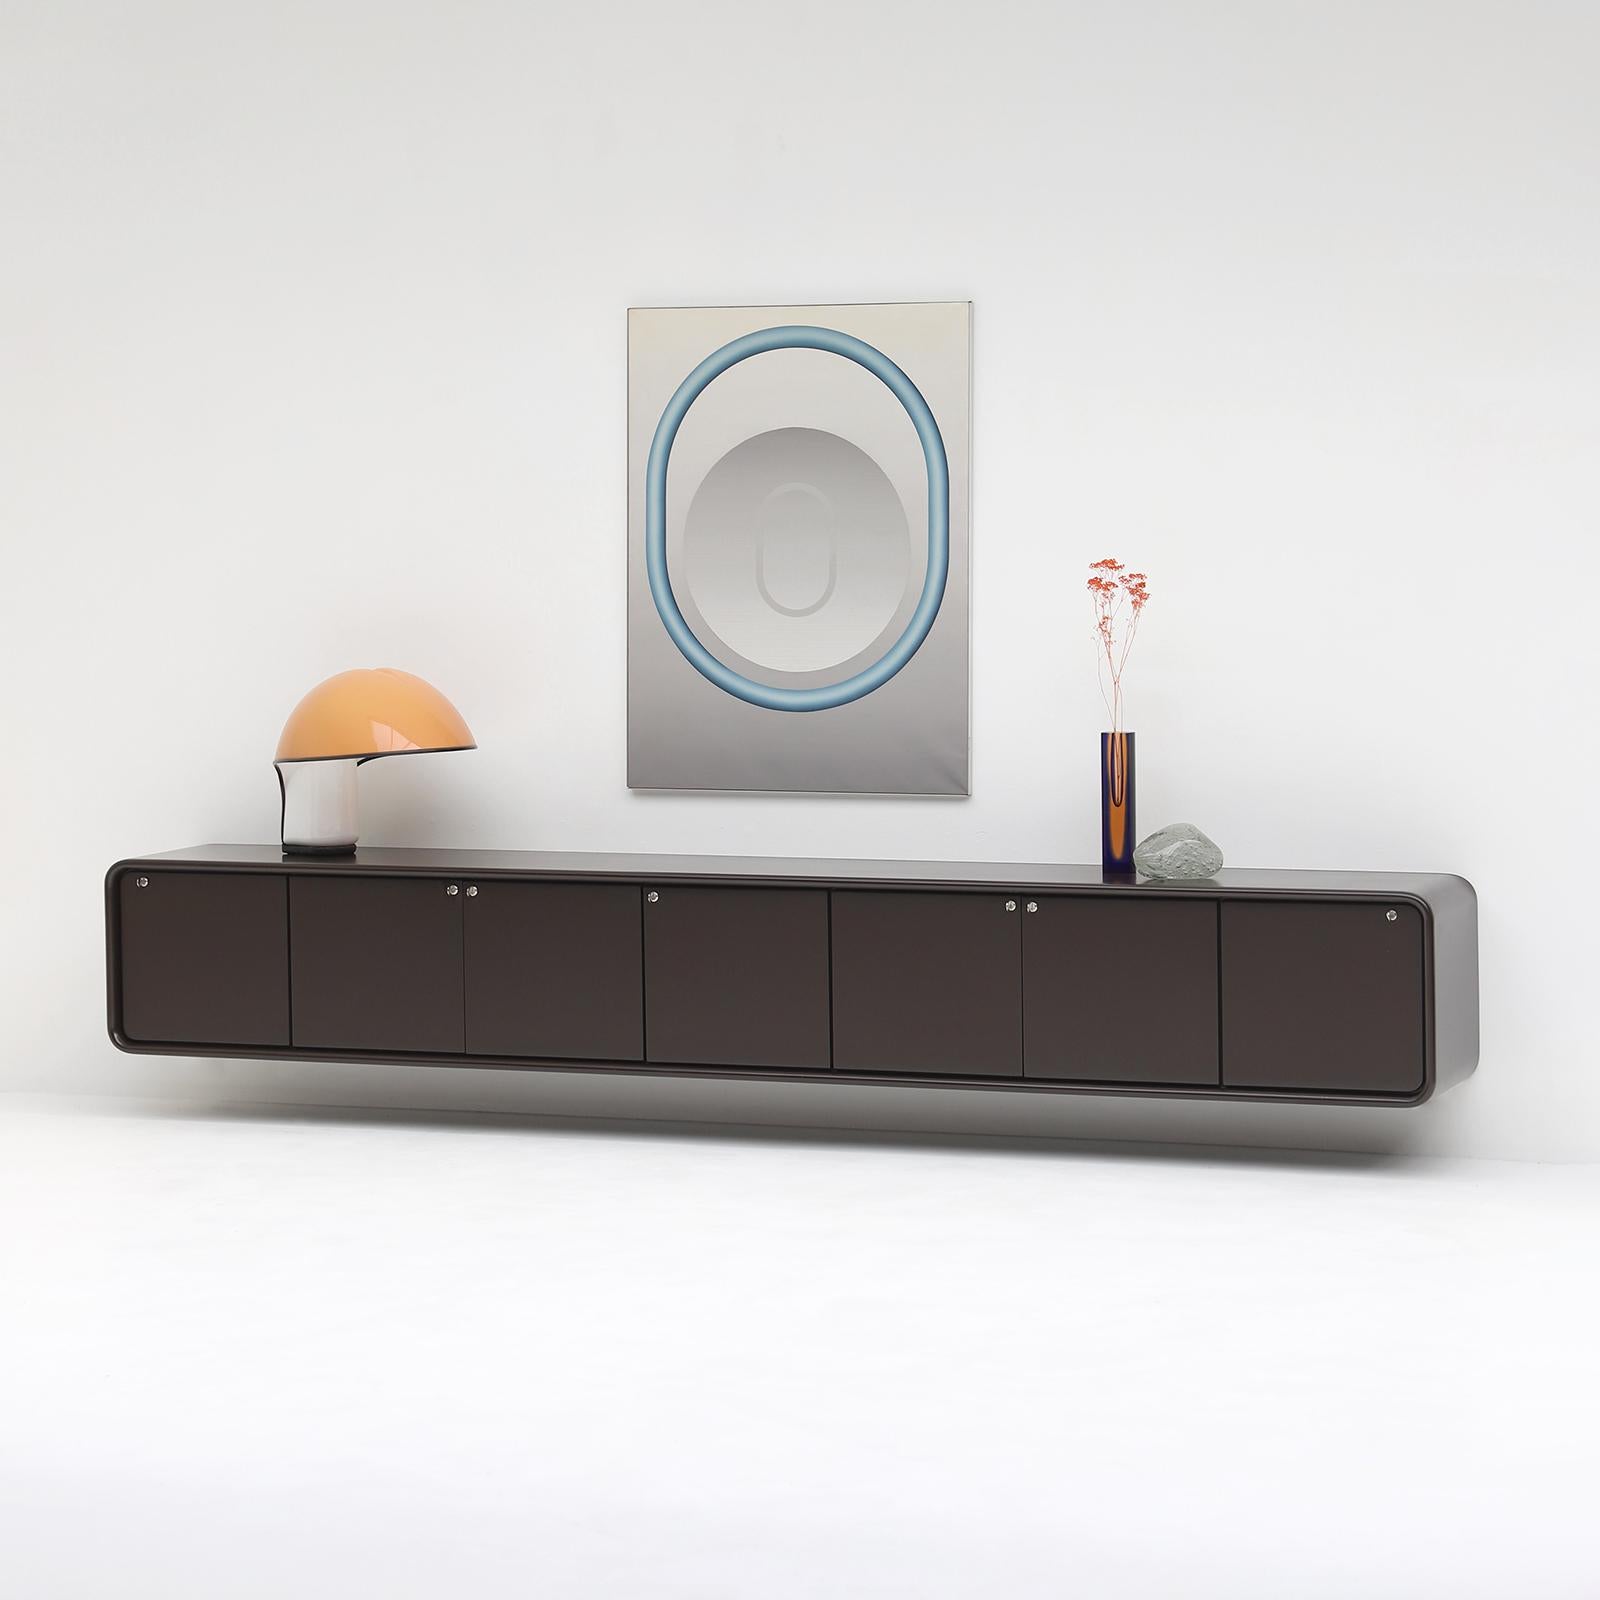 This floating sideboard with minimalistic feel was designed by Ghent based designer Frank De Clercq in 1972. The sideboard got the name ‘Janda’, named after the 1st client who purchased this design at first. This exclusive large model of the Janda